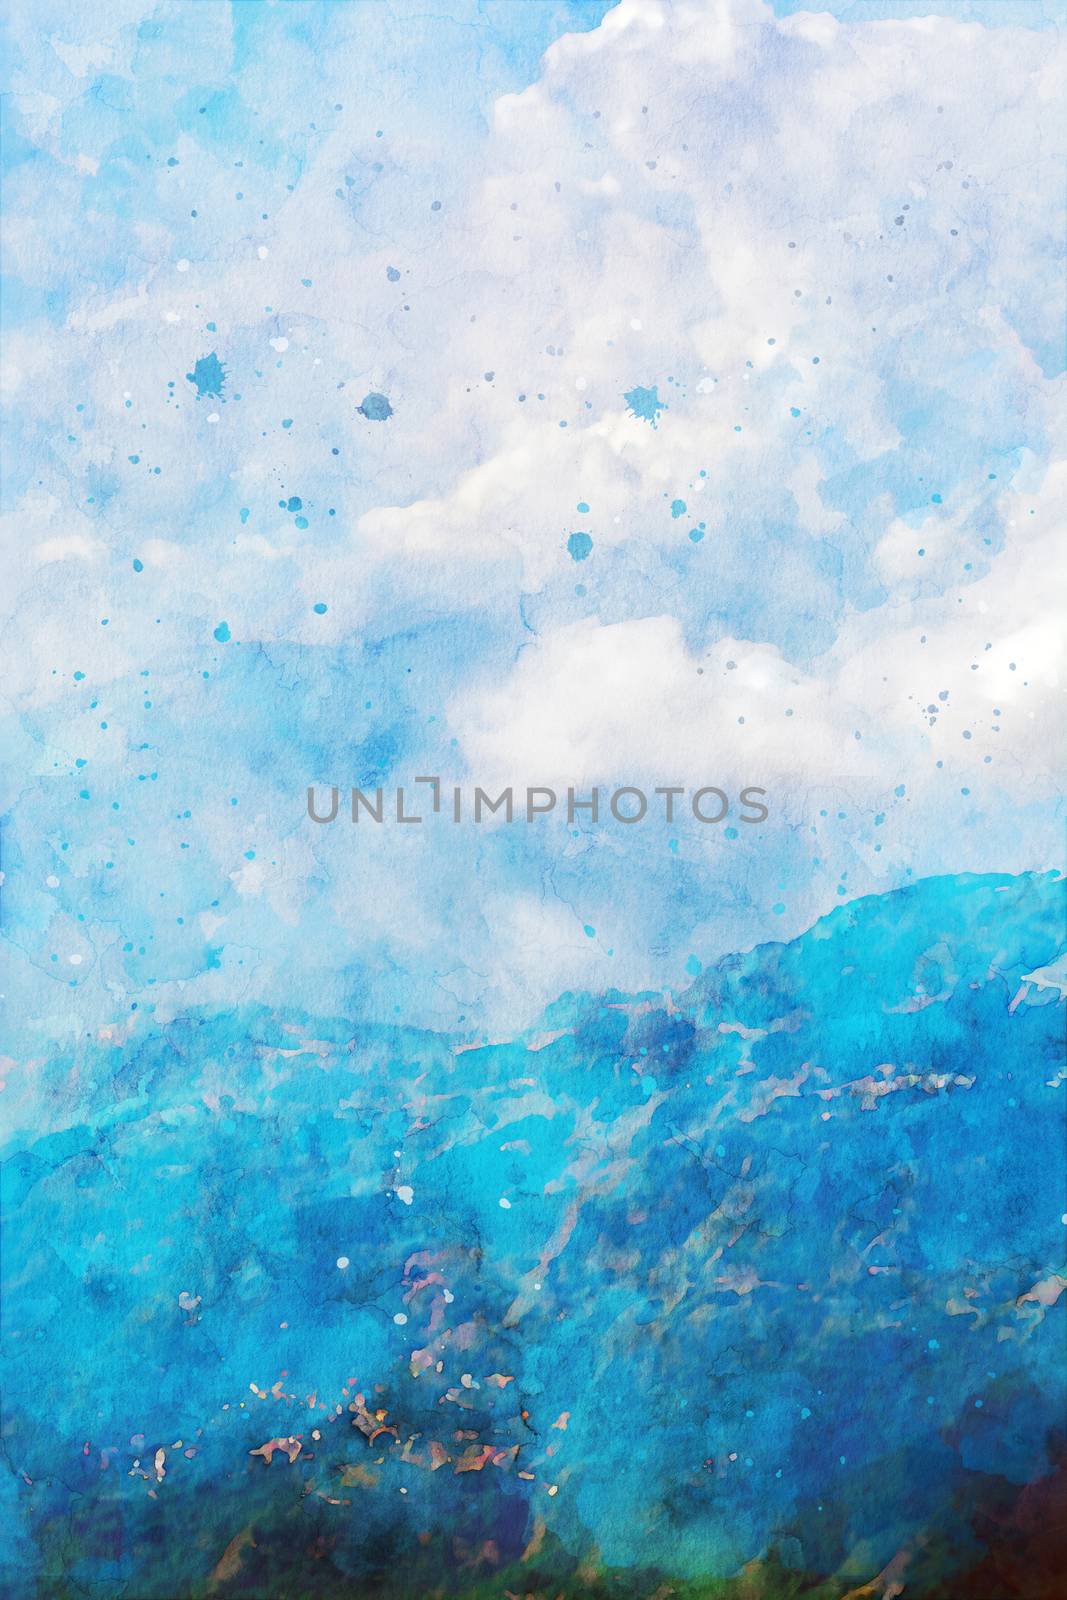 Mountains with sky and clouds background in blue shades, vertical image, winter season of nature illustration, digital watercolor painting